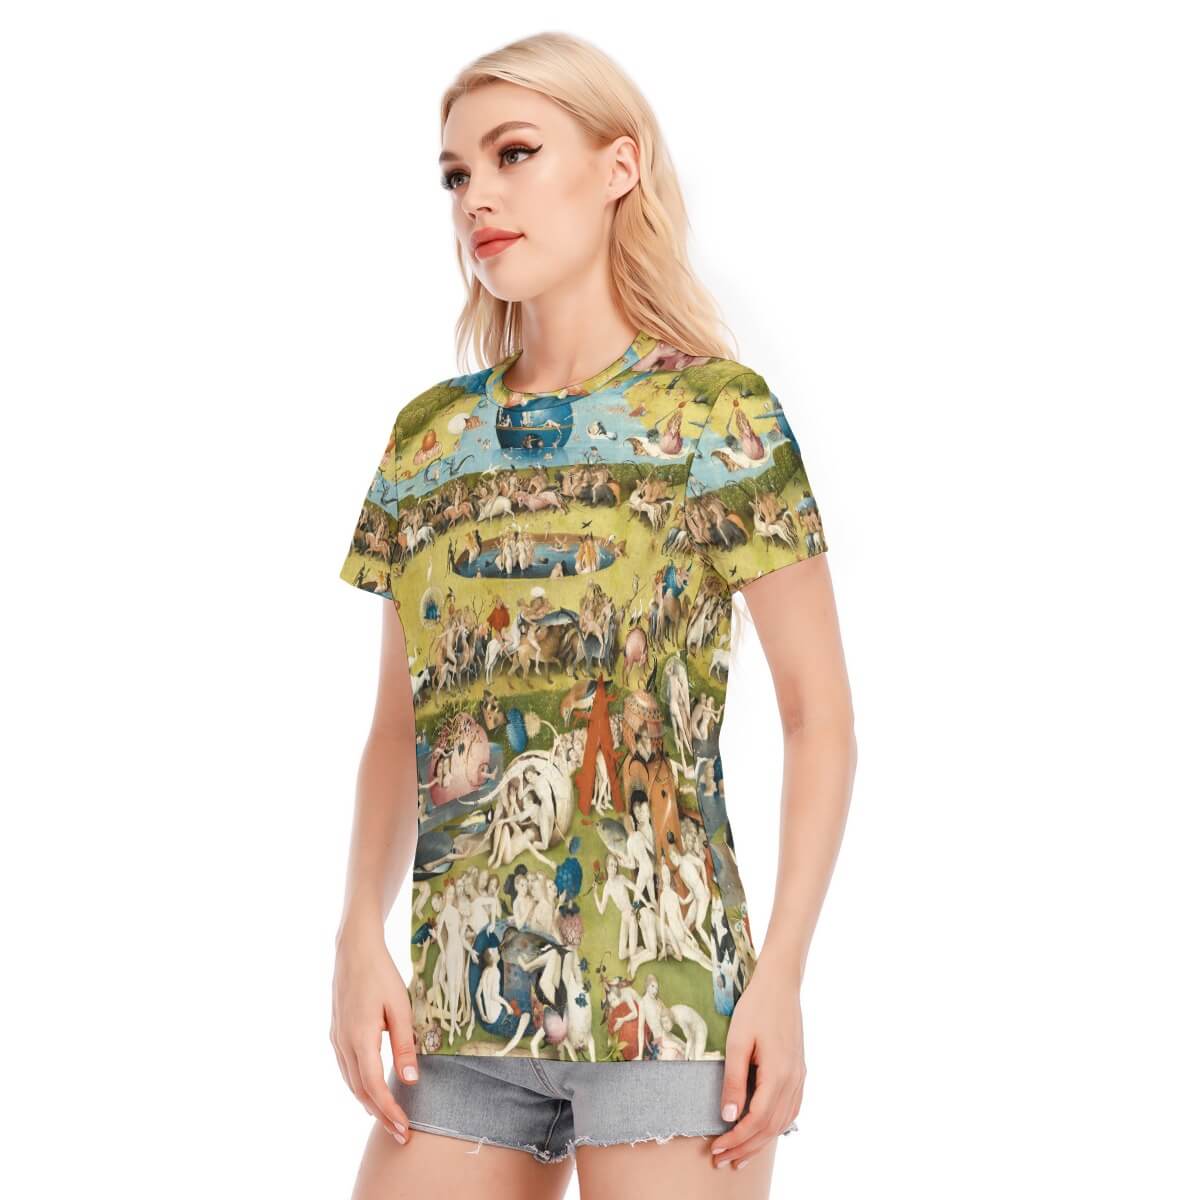 Earthly Delights Graphic Top